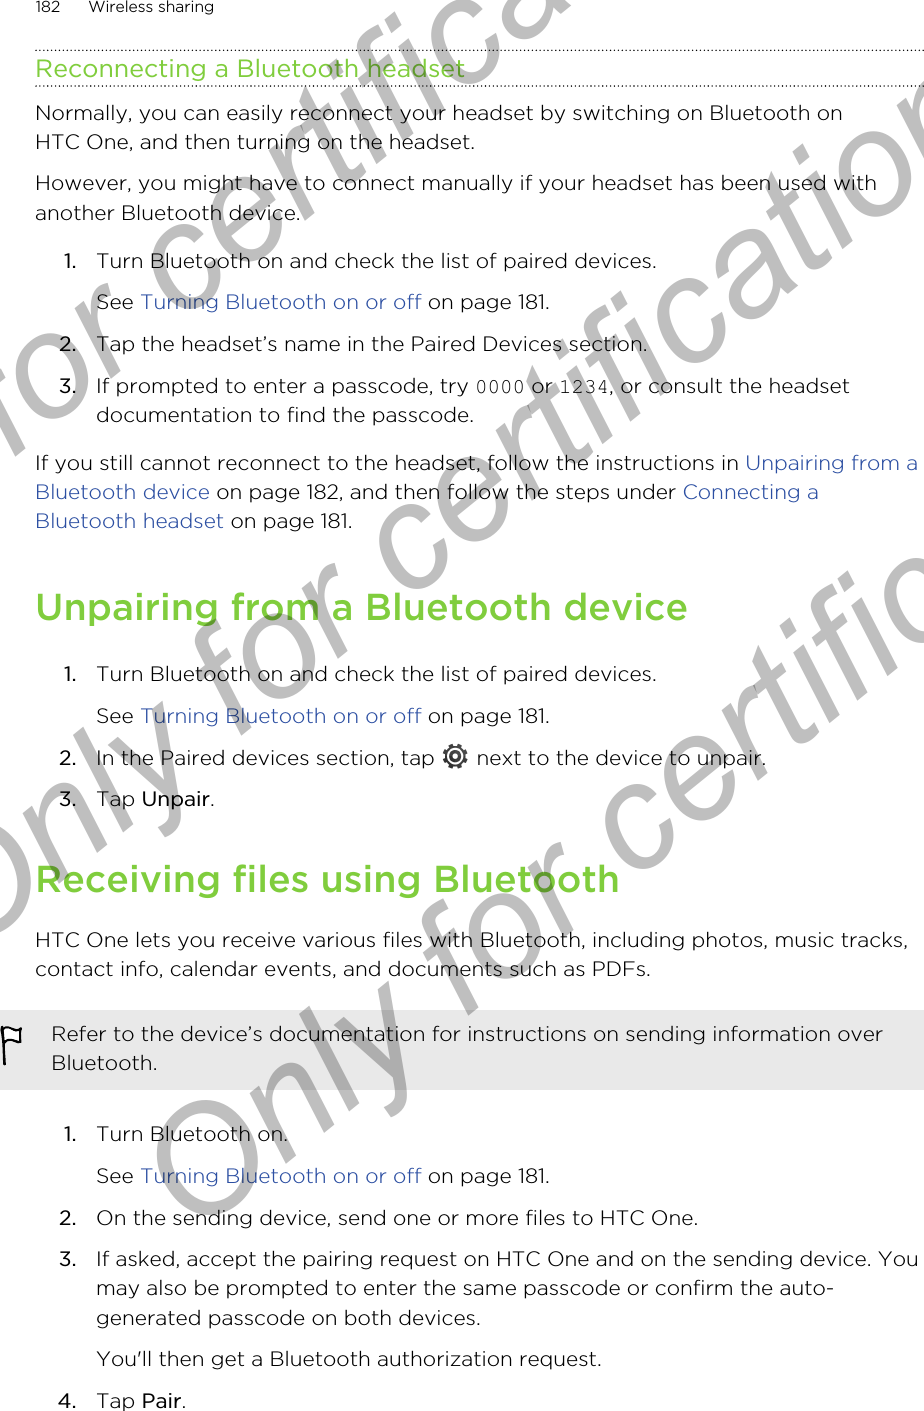 Reconnecting a Bluetooth headsetNormally, you can easily reconnect your headset by switching on Bluetooth onHTC One, and then turning on the headset.However, you might have to connect manually if your headset has been used withanother Bluetooth device.1. Turn Bluetooth on and check the list of paired devices. See Turning Bluetooth on or off on page 181.2. Tap the headset’s name in the Paired Devices section.3. If prompted to enter a passcode, try 0000 or 1234, or consult the headsetdocumentation to find the passcode.If you still cannot reconnect to the headset, follow the instructions in Unpairing from aBluetooth device on page 182, and then follow the steps under Connecting aBluetooth headset on page 181.Unpairing from a Bluetooth device1. Turn Bluetooth on and check the list of paired devices. See Turning Bluetooth on or off on page 181.2. In the Paired devices section, tap   next to the device to unpair.3. Tap Unpair.Receiving files using BluetoothHTC One lets you receive various files with Bluetooth, including photos, music tracks,contact info, calendar events, and documents such as PDFs.Refer to the device’s documentation for instructions on sending information overBluetooth.1. Turn Bluetooth on. See Turning Bluetooth on or off on page 181.2. On the sending device, send one or more files to HTC One.3. If asked, accept the pairing request on HTC One and on the sending device. Youmay also be prompted to enter the same passcode or confirm the auto-generated passcode on both devices. You&apos;ll then get a Bluetooth authorization request.4. Tap Pair.182 Wireless sharingOnly for certification  Only for certification  Only for certification